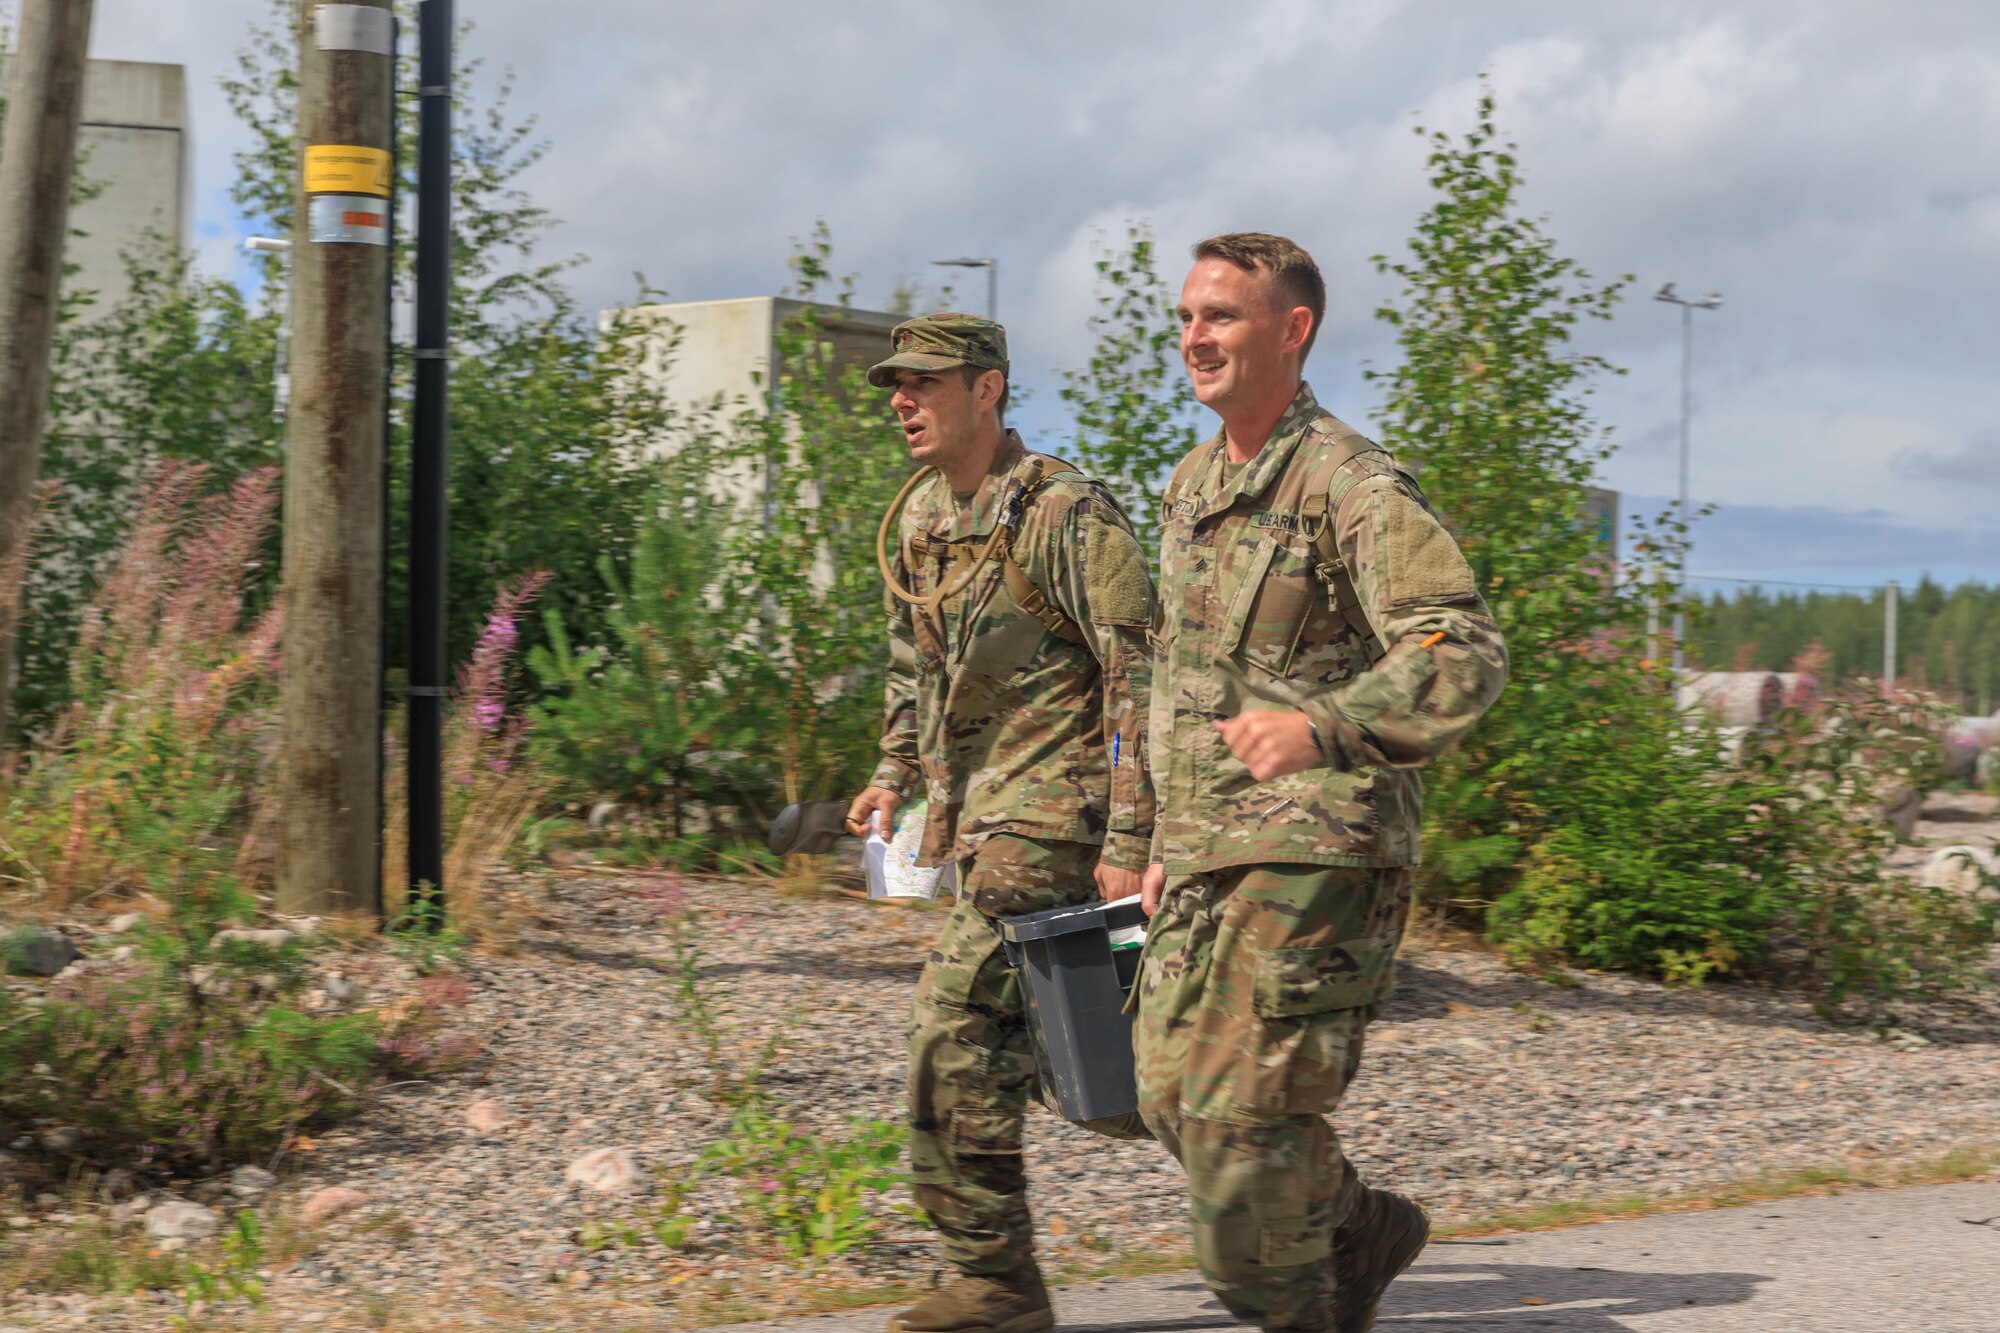 Maj. James Fink (left), 94th Aerial Port Squadron in the 94th Airlift Wing, and Sgt. Michael Yarrington, 108th Training Command, carry a weight to the finish of the orienteering course during the Interallied Confederation of Reserve Officers military competition in Lahti, Finland on August 1st. Teams were given several different maps and tasked with find control points in the woods. The CIOR MILCOMP is an annual competition among NATO and Partnership for Peace nations. This competition test reserve service members from allied nations on several core disciplines in teams of three.